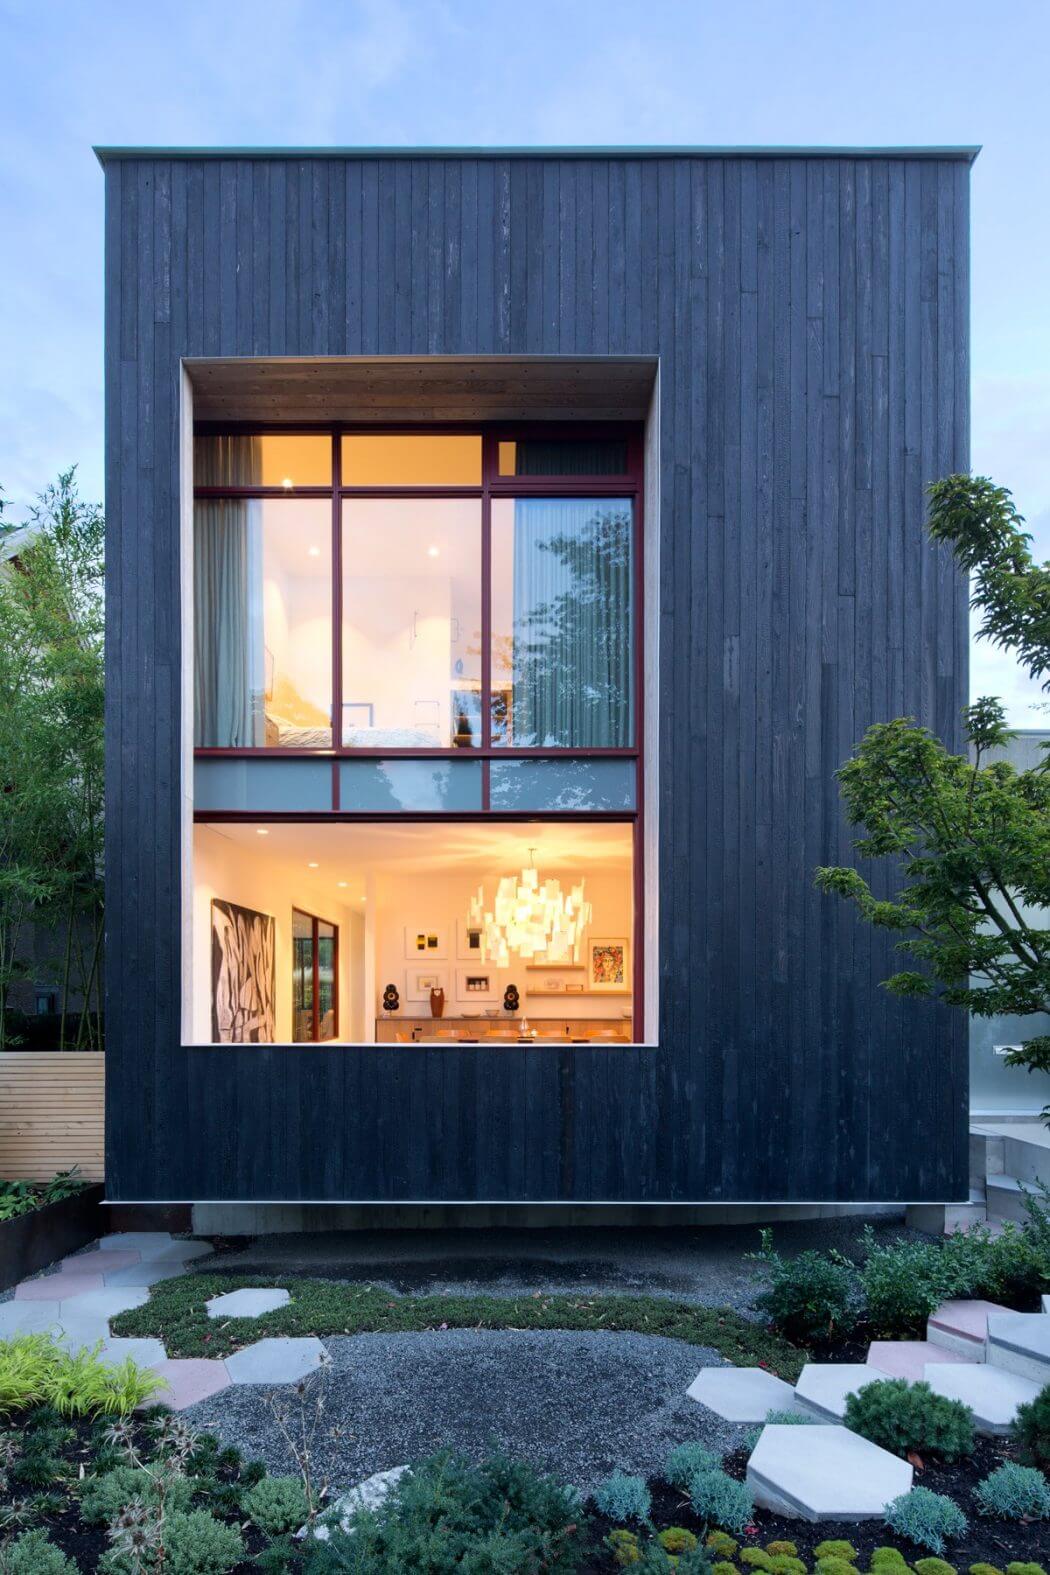 A modern, minimalist house with wooden exterior and large glass windows showcasing the interior.